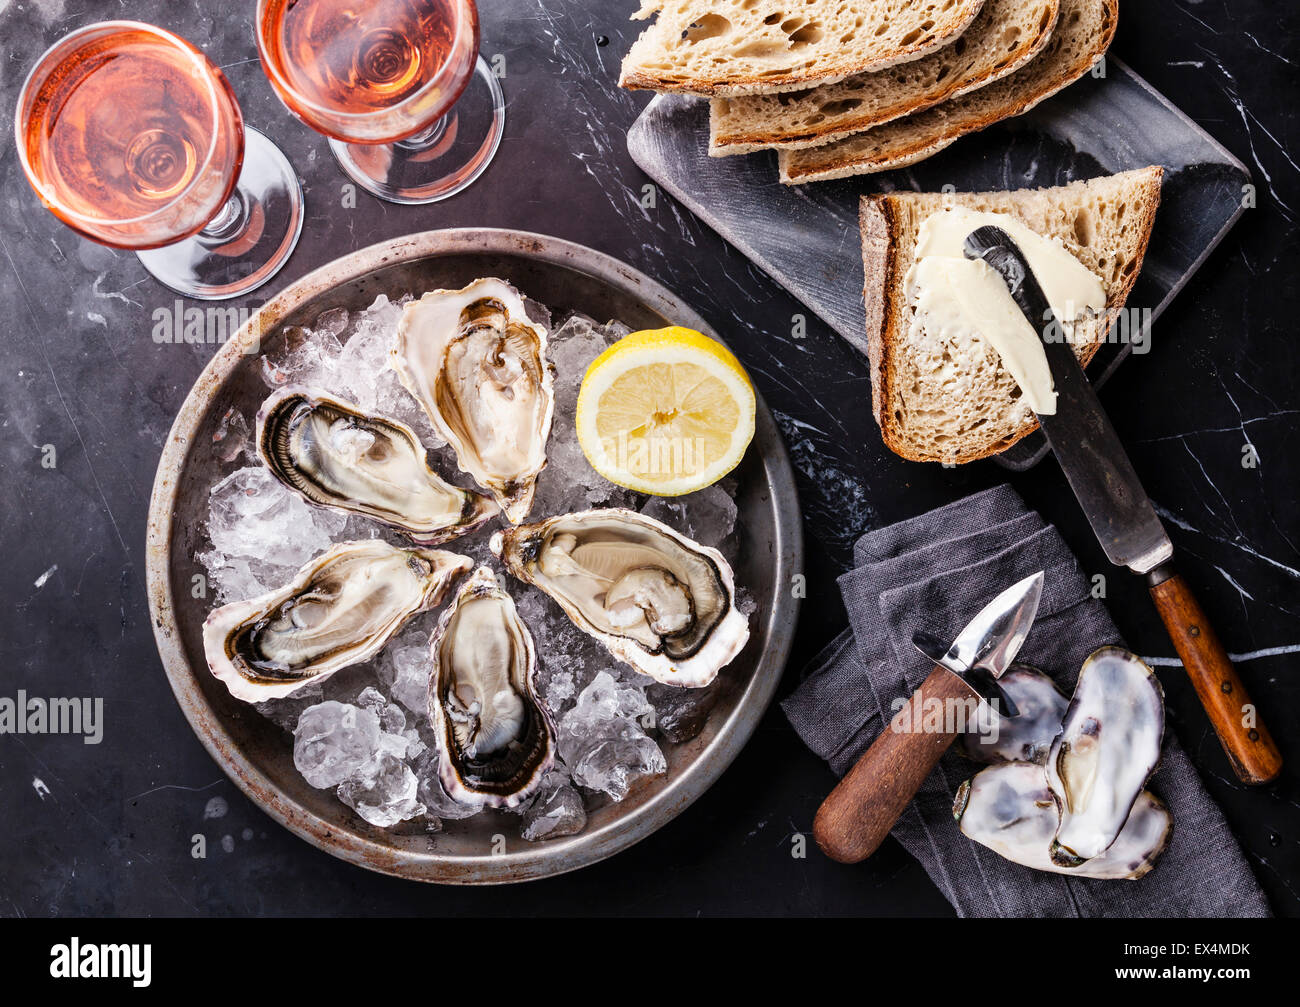 Opened Oysters on metal plate with dark bread with butter and rose wine on dark marble background Stock Photo